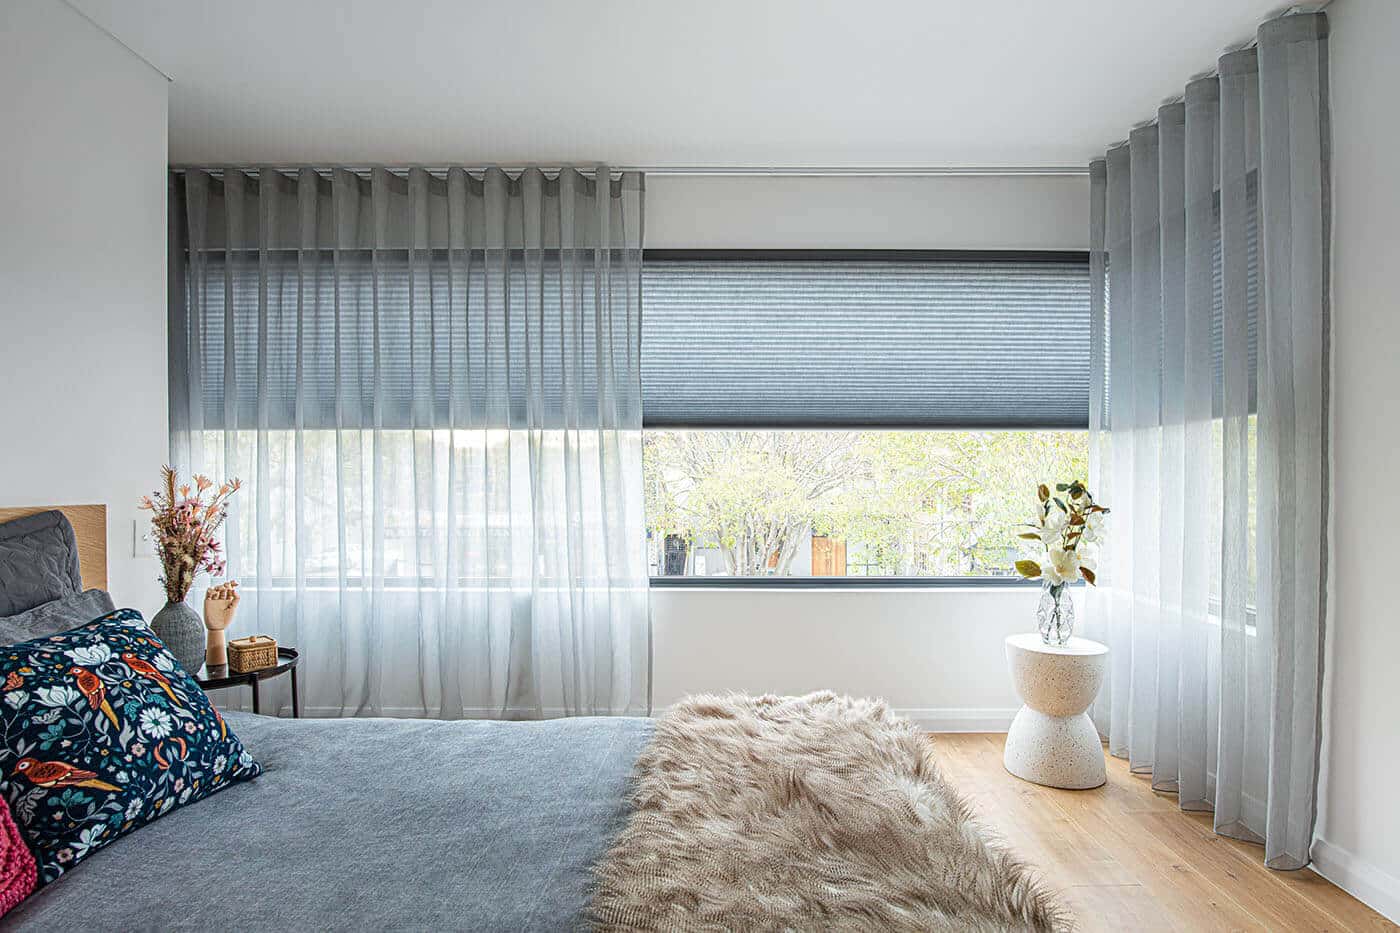 Modern transitional style blue-themed bedroom featuring long horizontal window panes partially covered by layers if Luxaflex curtain and sheers, giving the room a cozy and aesthetic look. On display in our Sydney showroom.